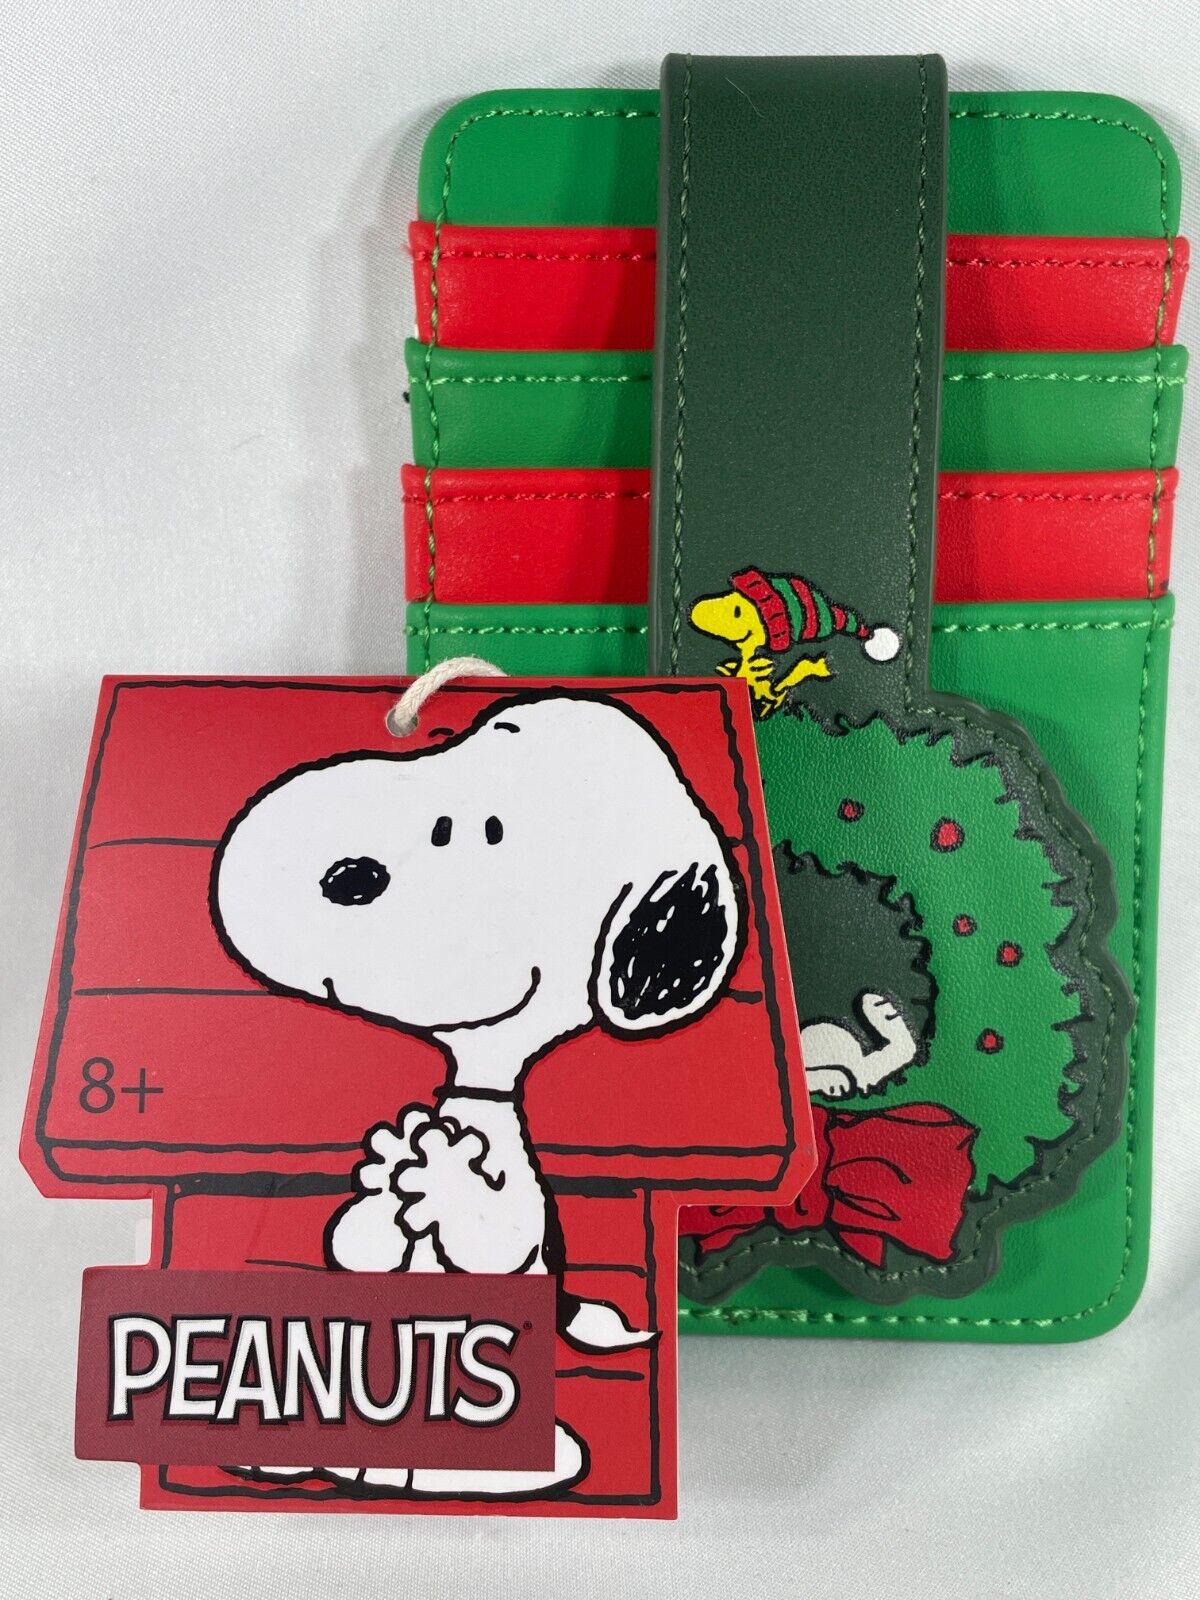 LIMITED EDITION Loungefly x Peanuts Snoopy Wreath Green Snap Wallet Festive Holi